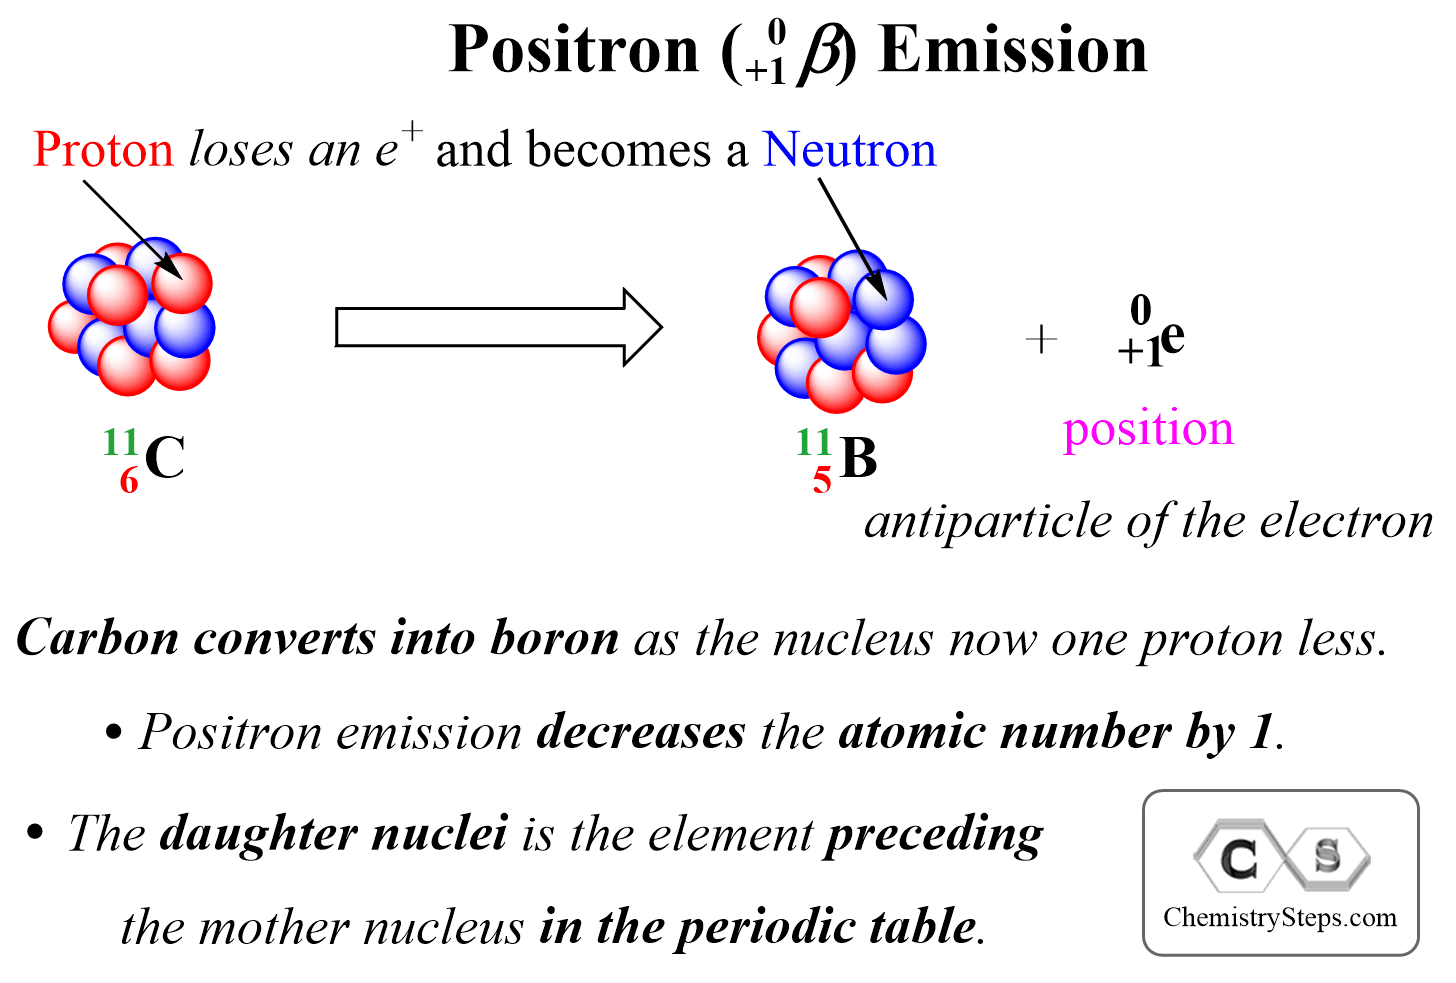 positron emission decreases the atomic number by one